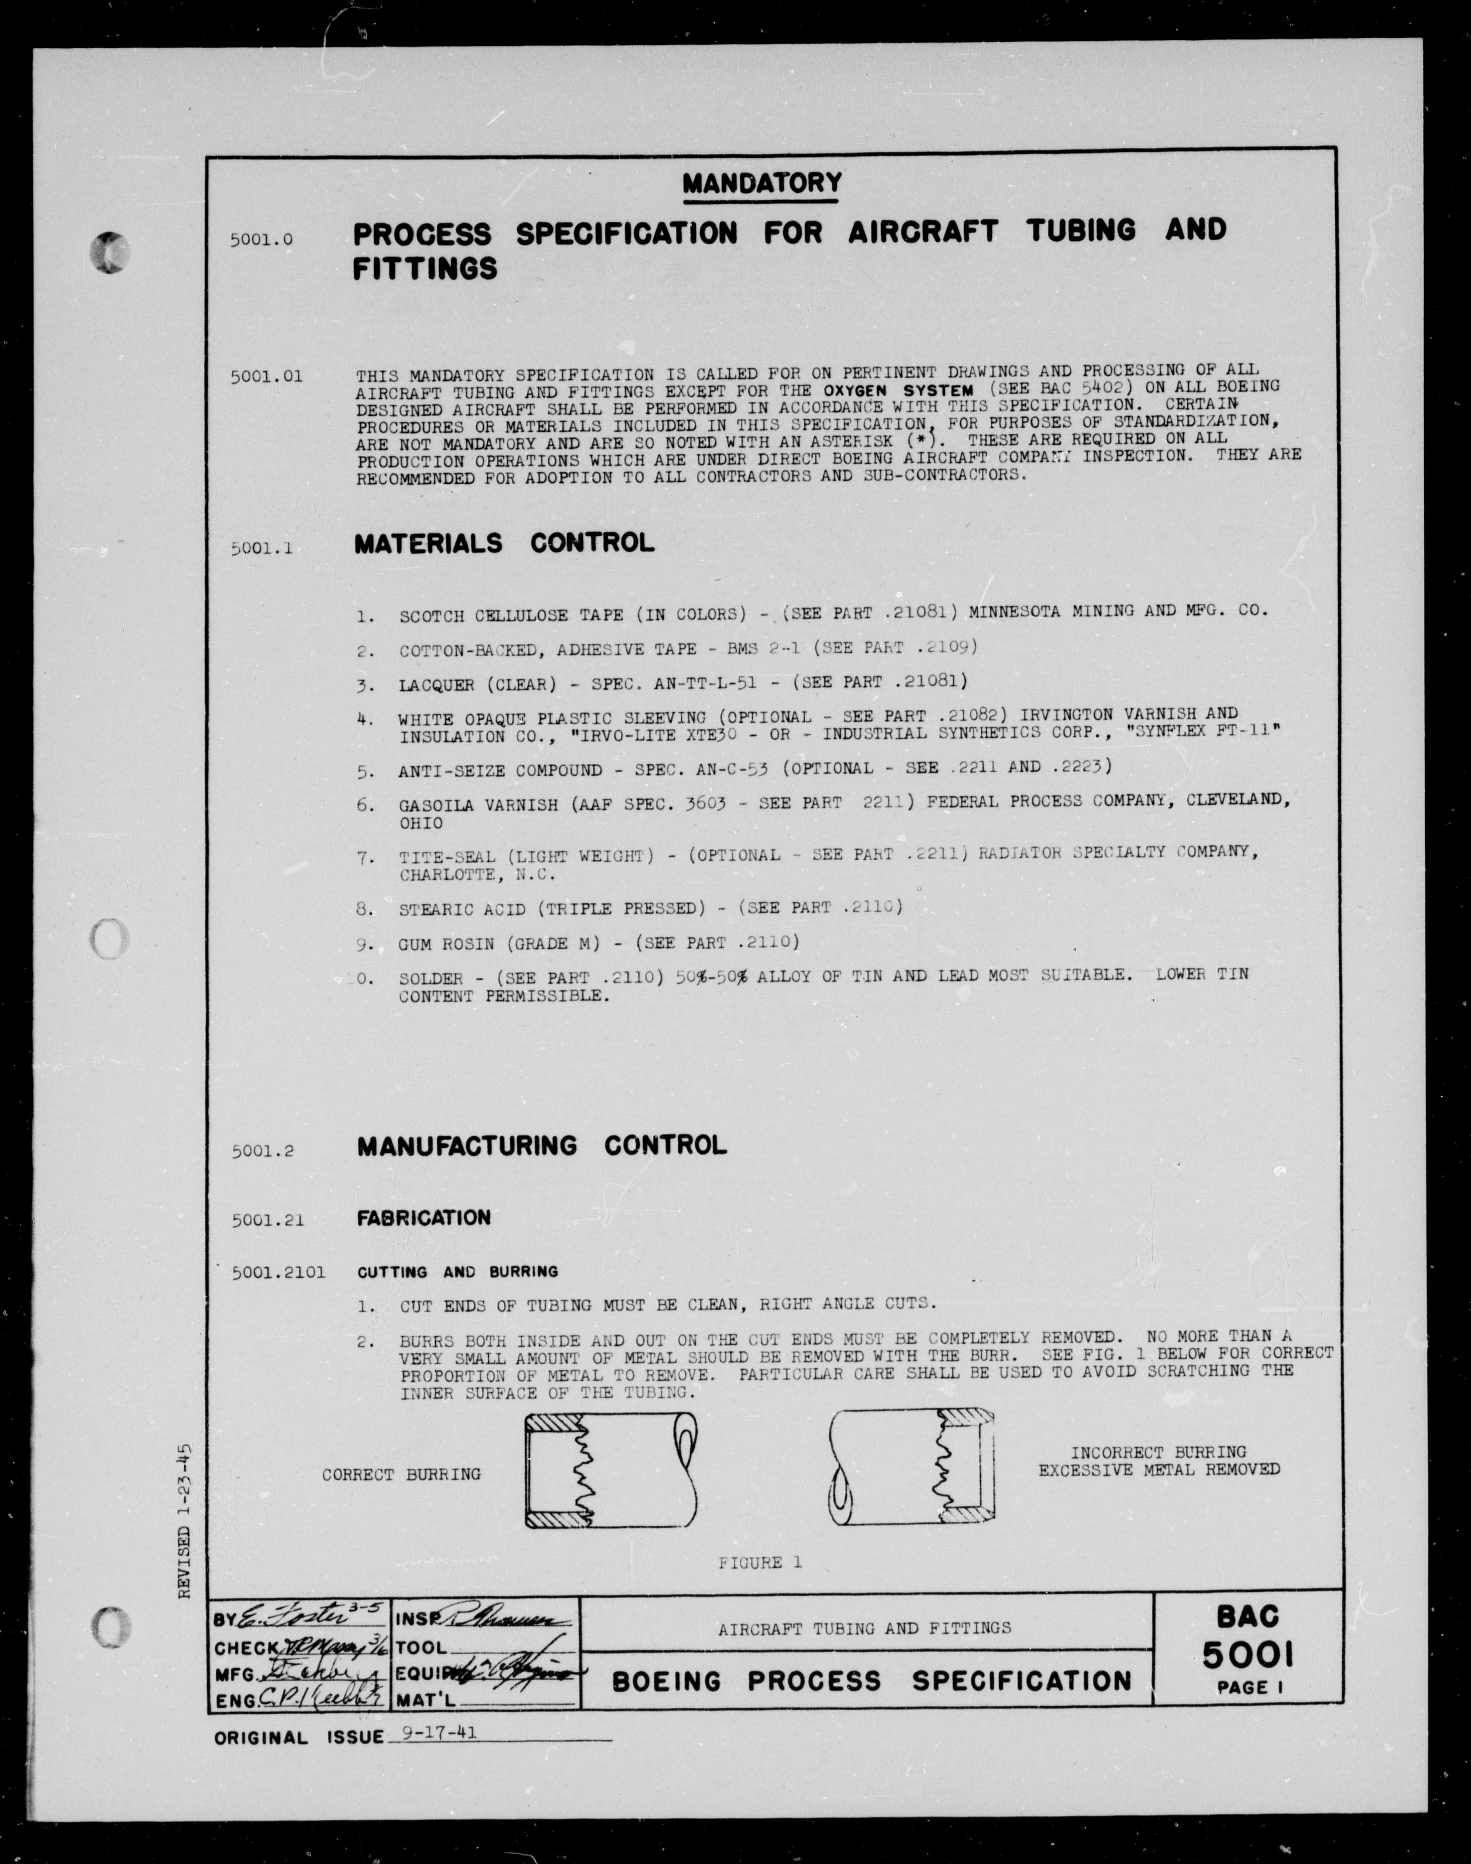 Sample page 1 from AirCorps Library document: Aircraft Tubing and Fittings